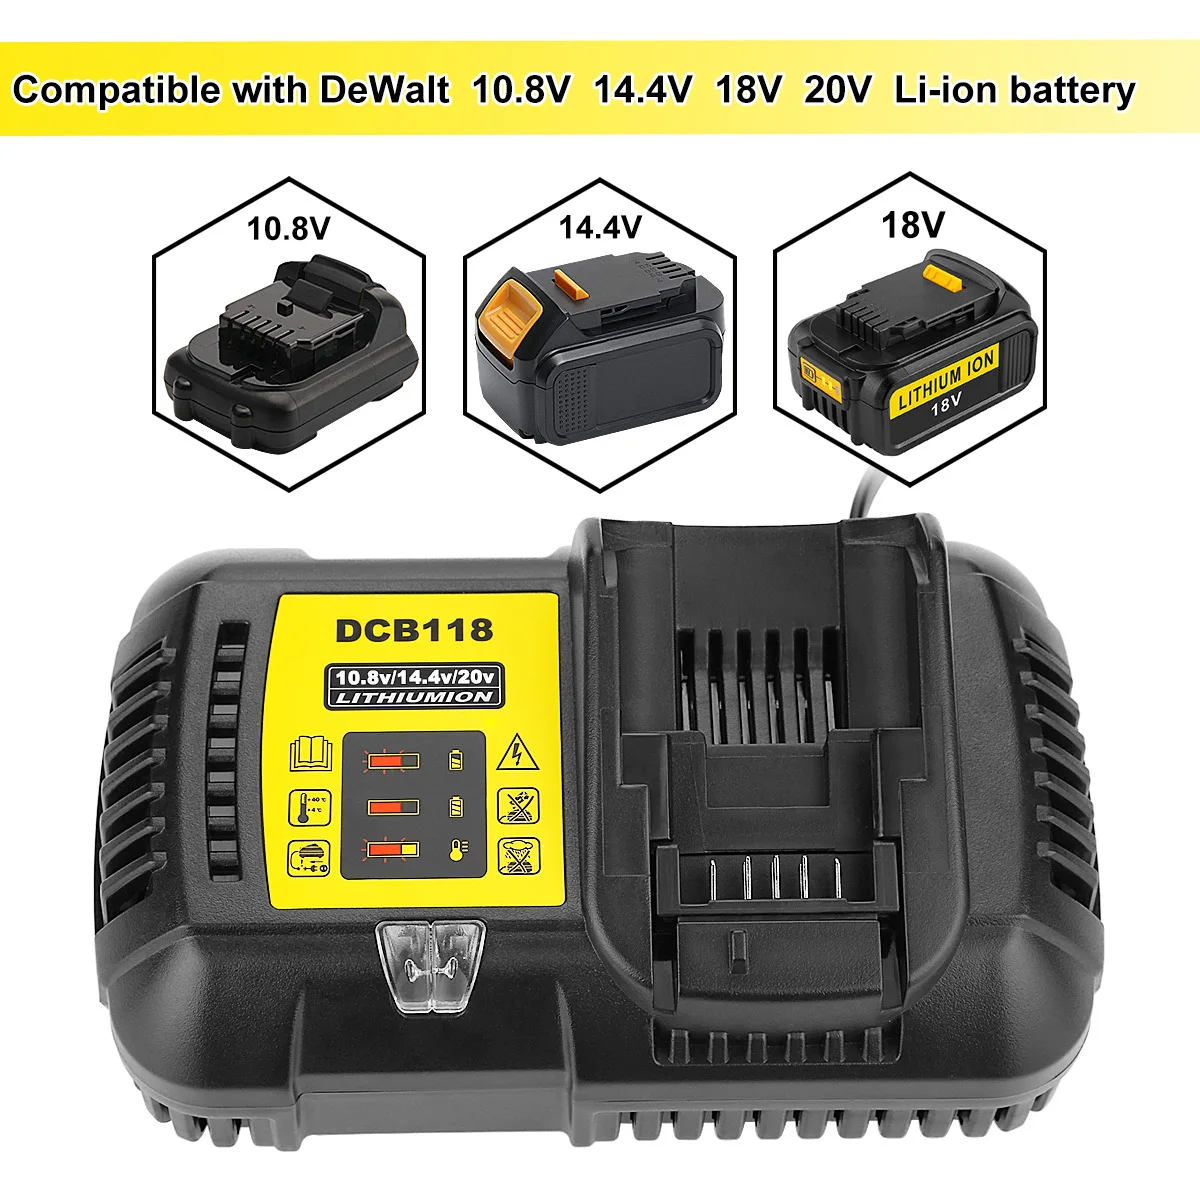 

DCB118 Li-ion Battery Charger Fast Charging 4.5A for DeWalt 10.8V 12V 14.4V 18V Max. 60V DCB101 DCB200 DCB140 DCB105 DCB200